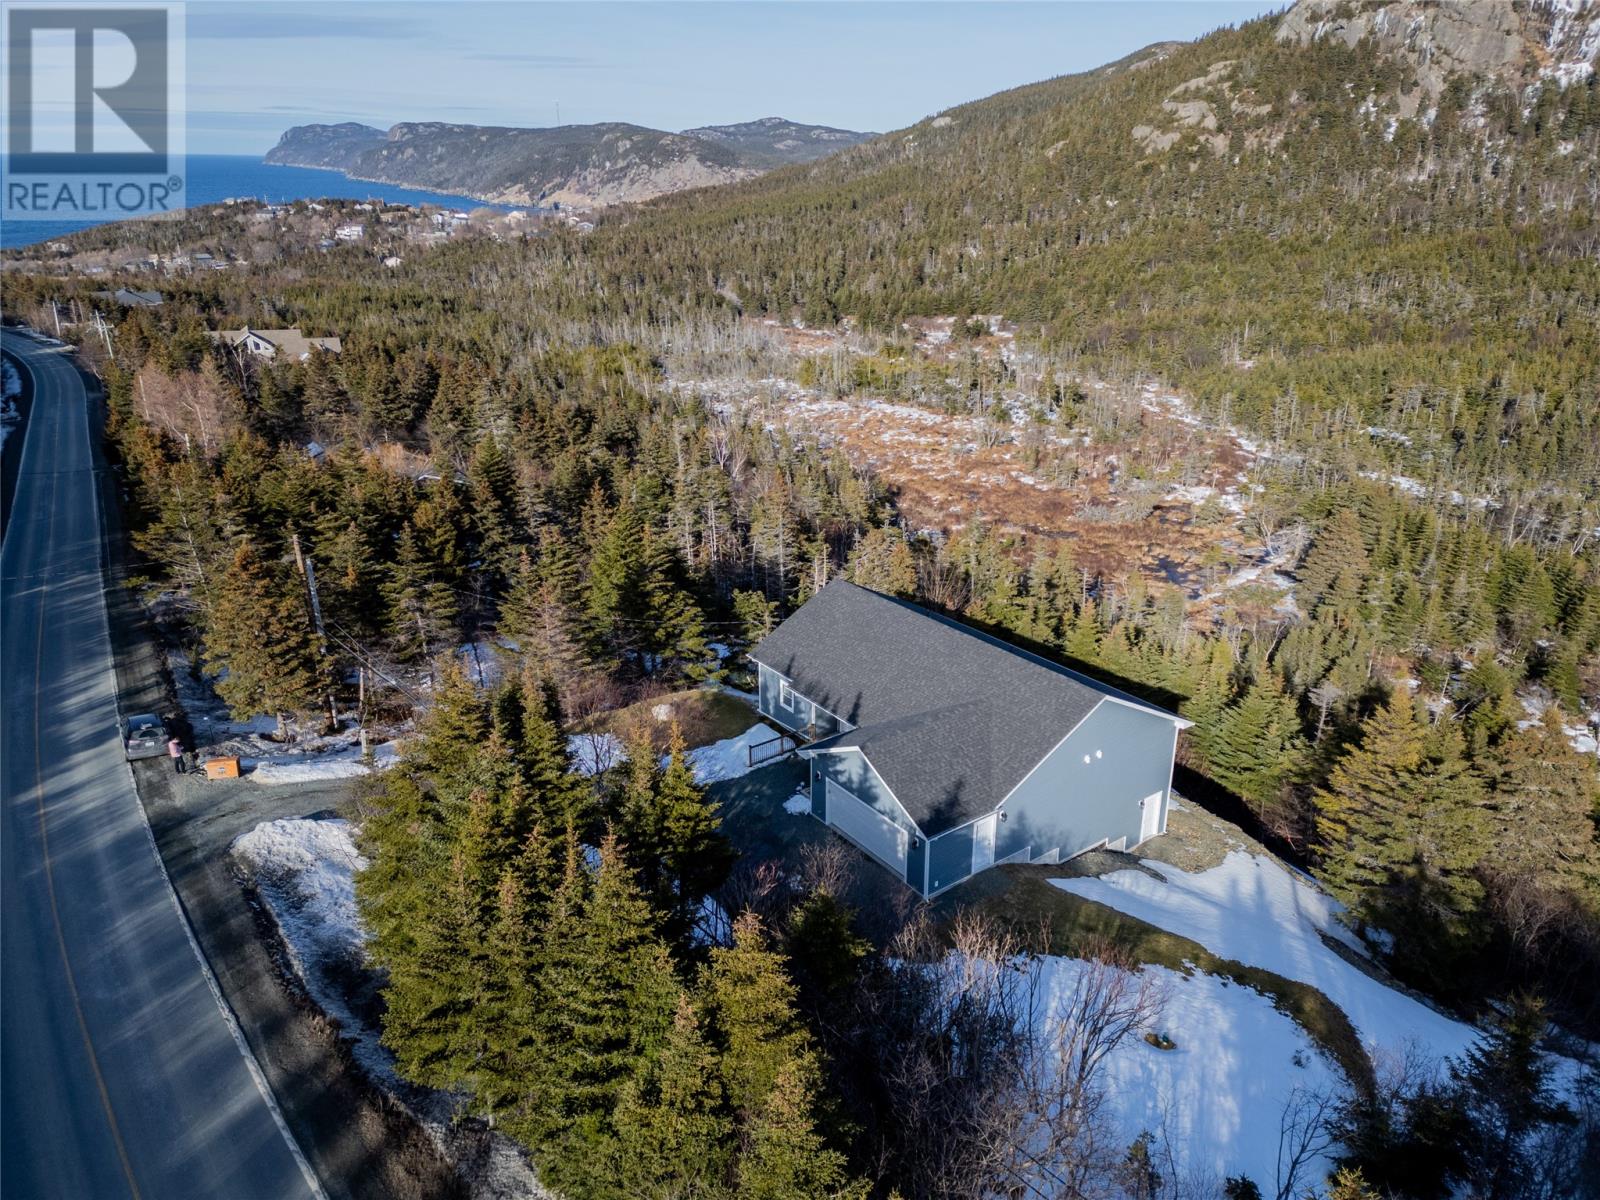 285 Beachy Cove Road, Portugal Cove-St. Philips, A1M1Z4, 3 Bedrooms Bedrooms, ,2 BathroomsBathrooms,Single Family,For sale,Beachy Cove,1269164